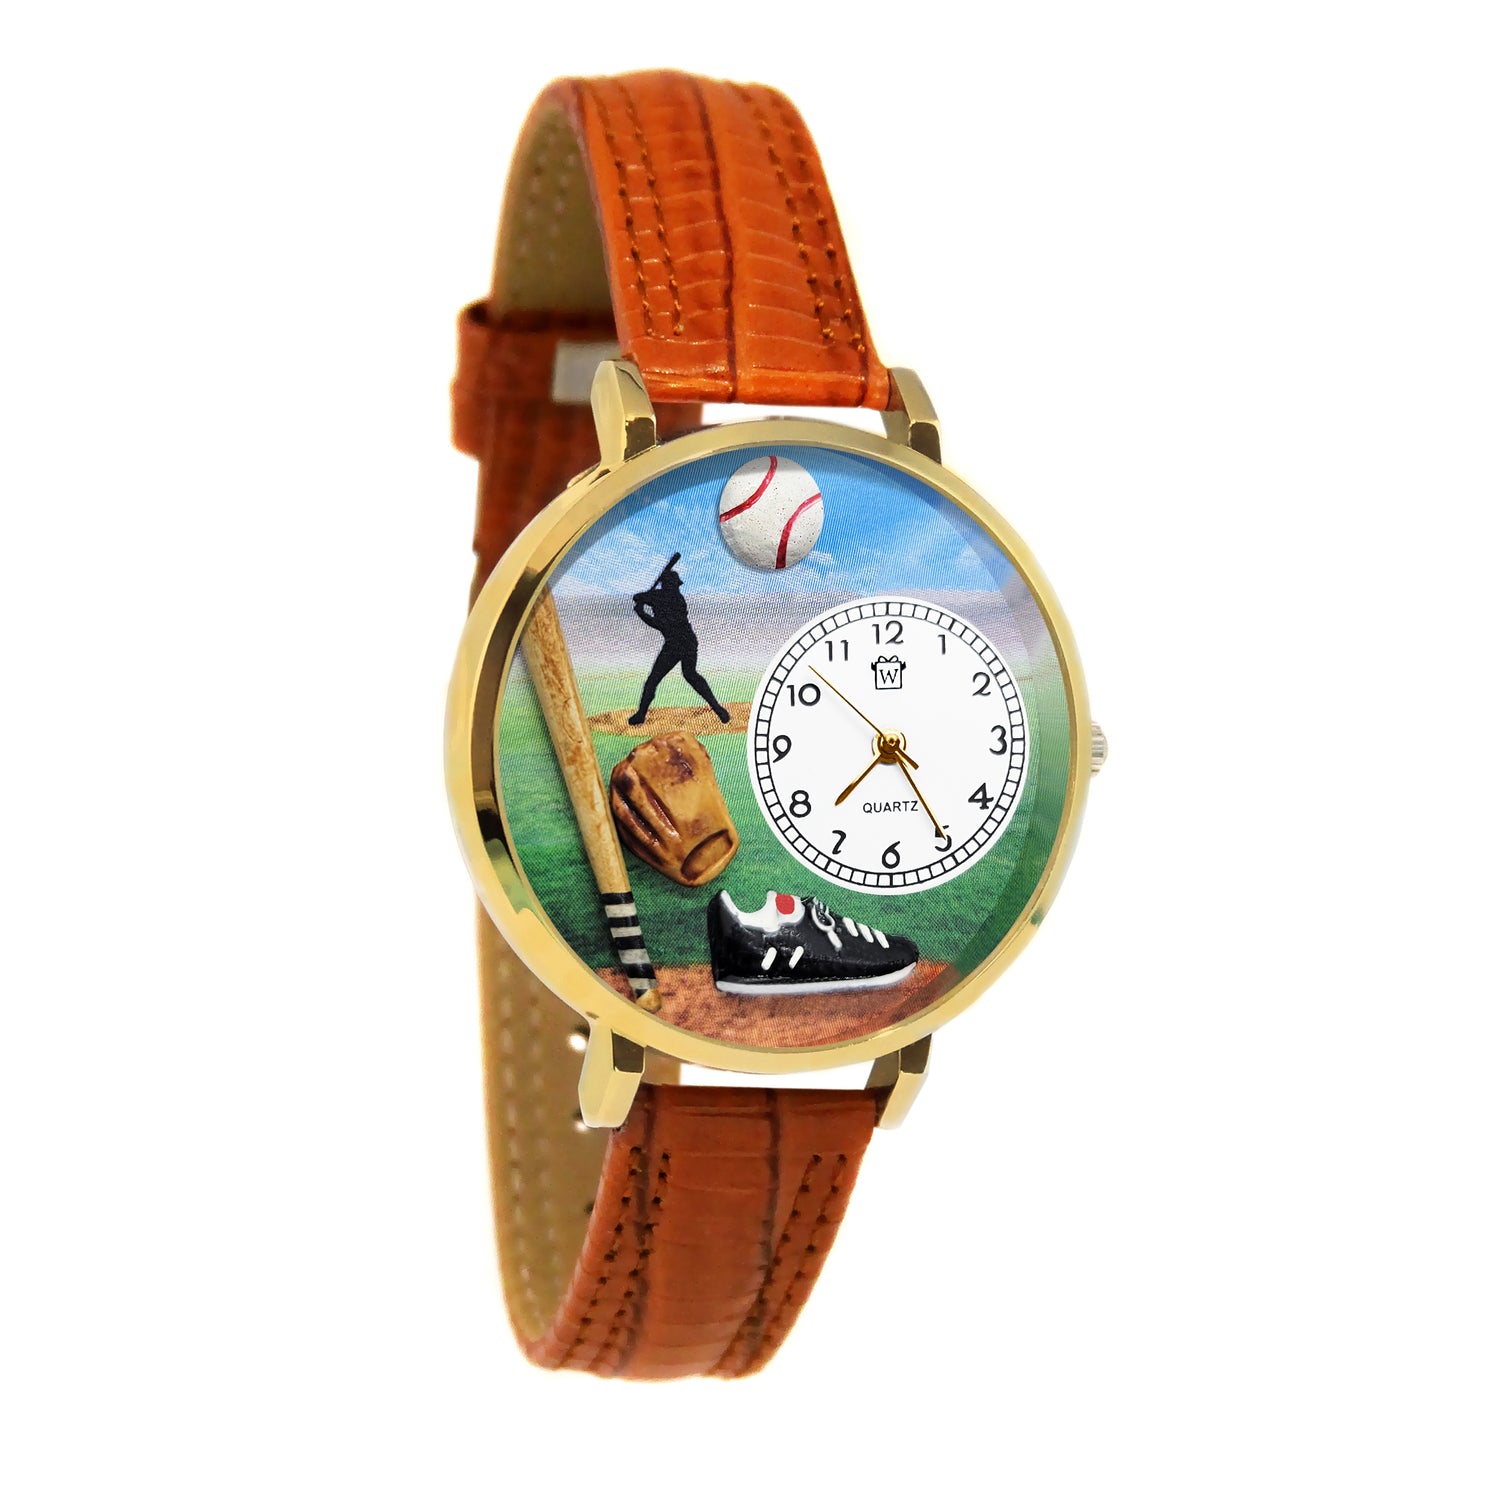 Whimsical Gifts | Baseball 3D Watch Large Style | Handmade in USA | Hobbies & Special Interests | Sports | Novelty Unique Fun Miniatures Gift | Gold Finish Tan Leather Watch Band